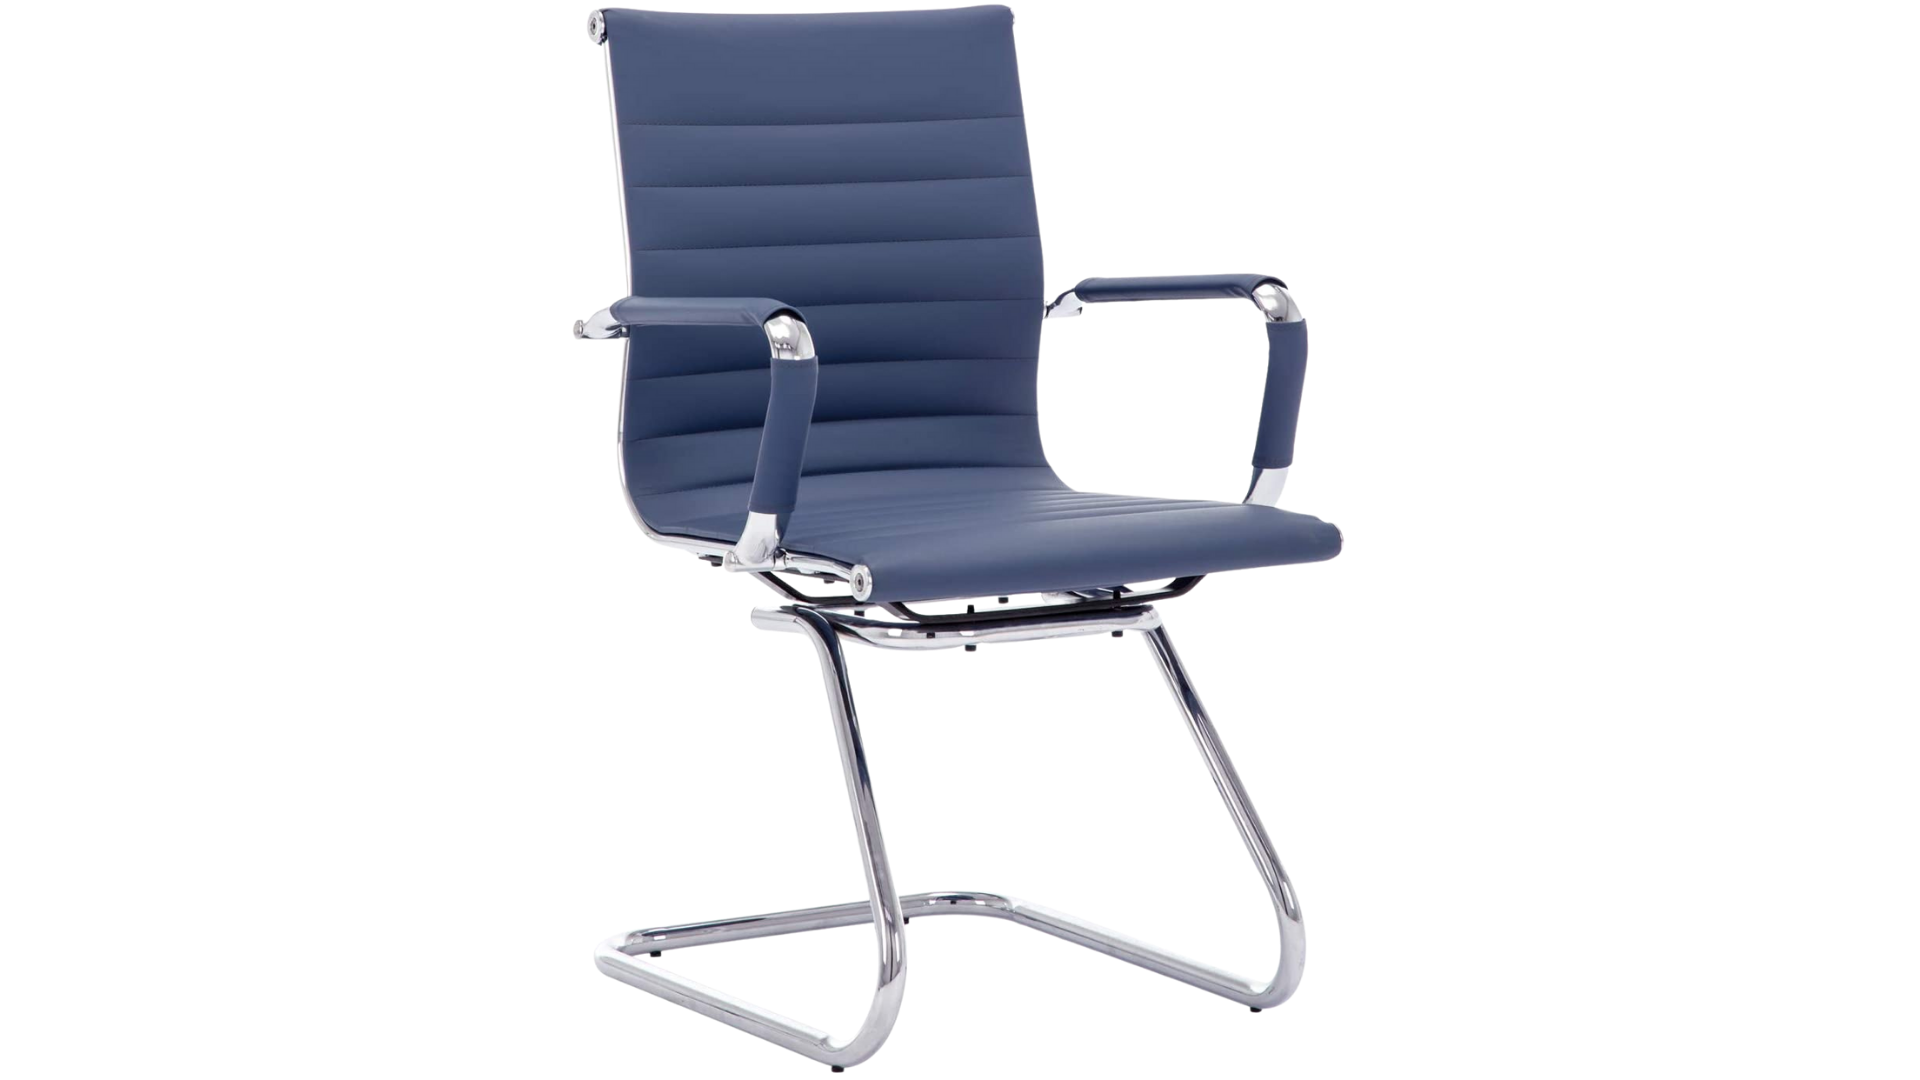 Wahson best desk chair with no wheels